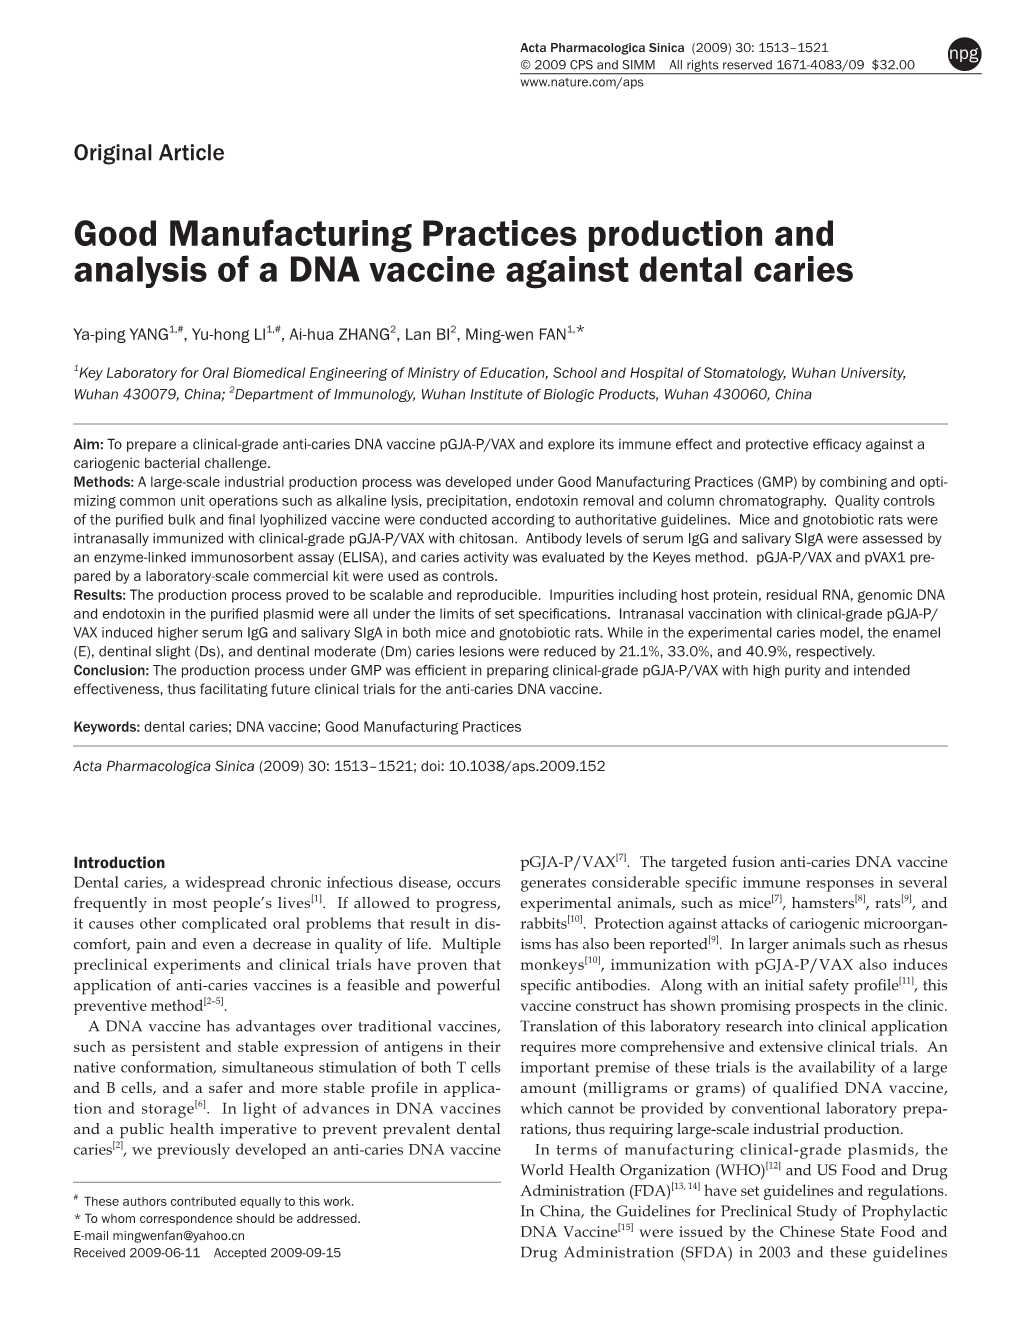 Good Manufacturing Practices Production and Analysis of a DNA Vaccine Against Dental Caries